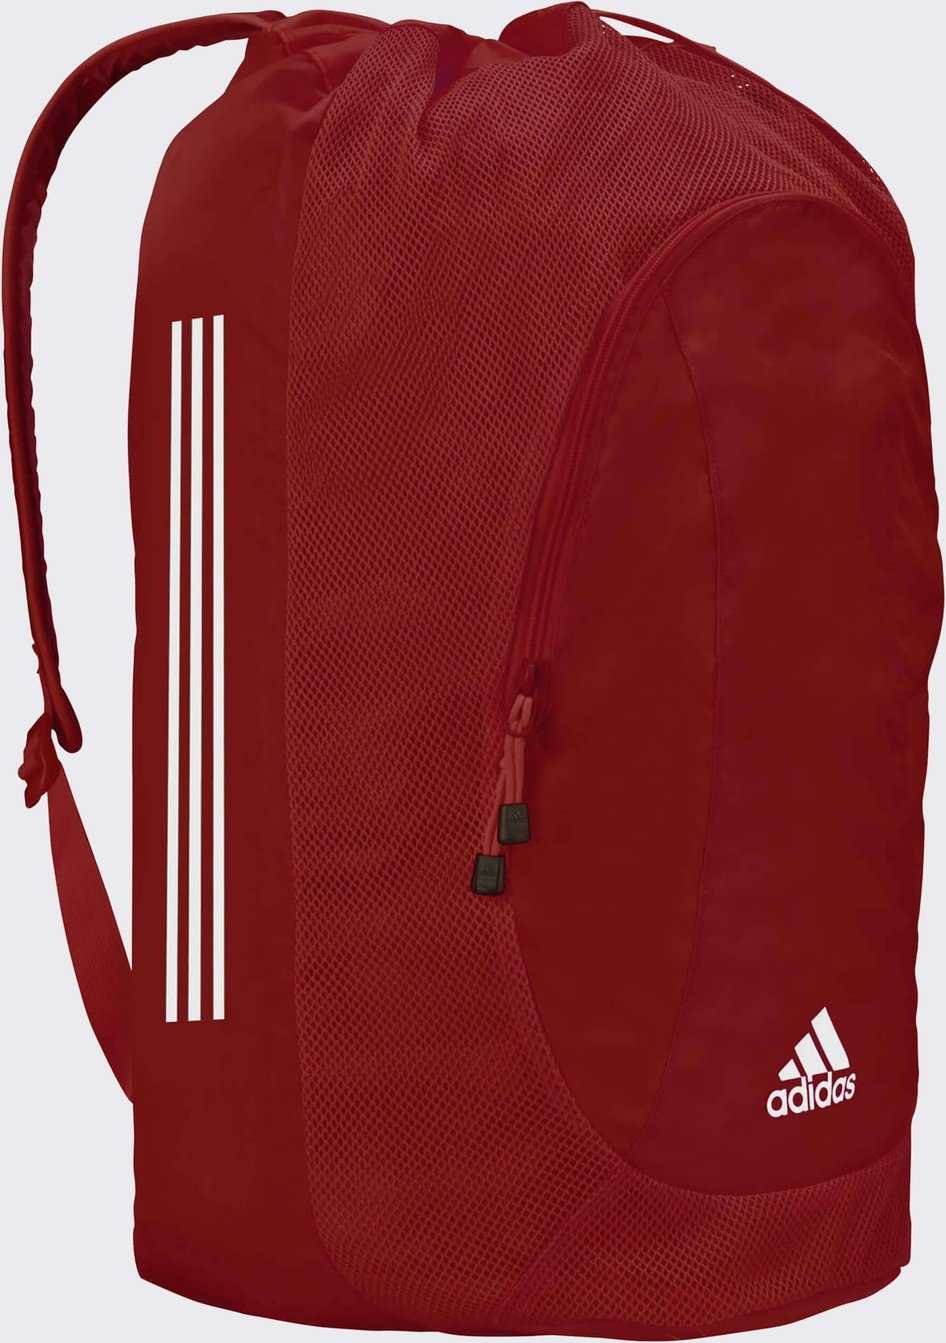 Adidas aA5147202 Wrestling Gear Bag - Red White - HIT a Double - 1